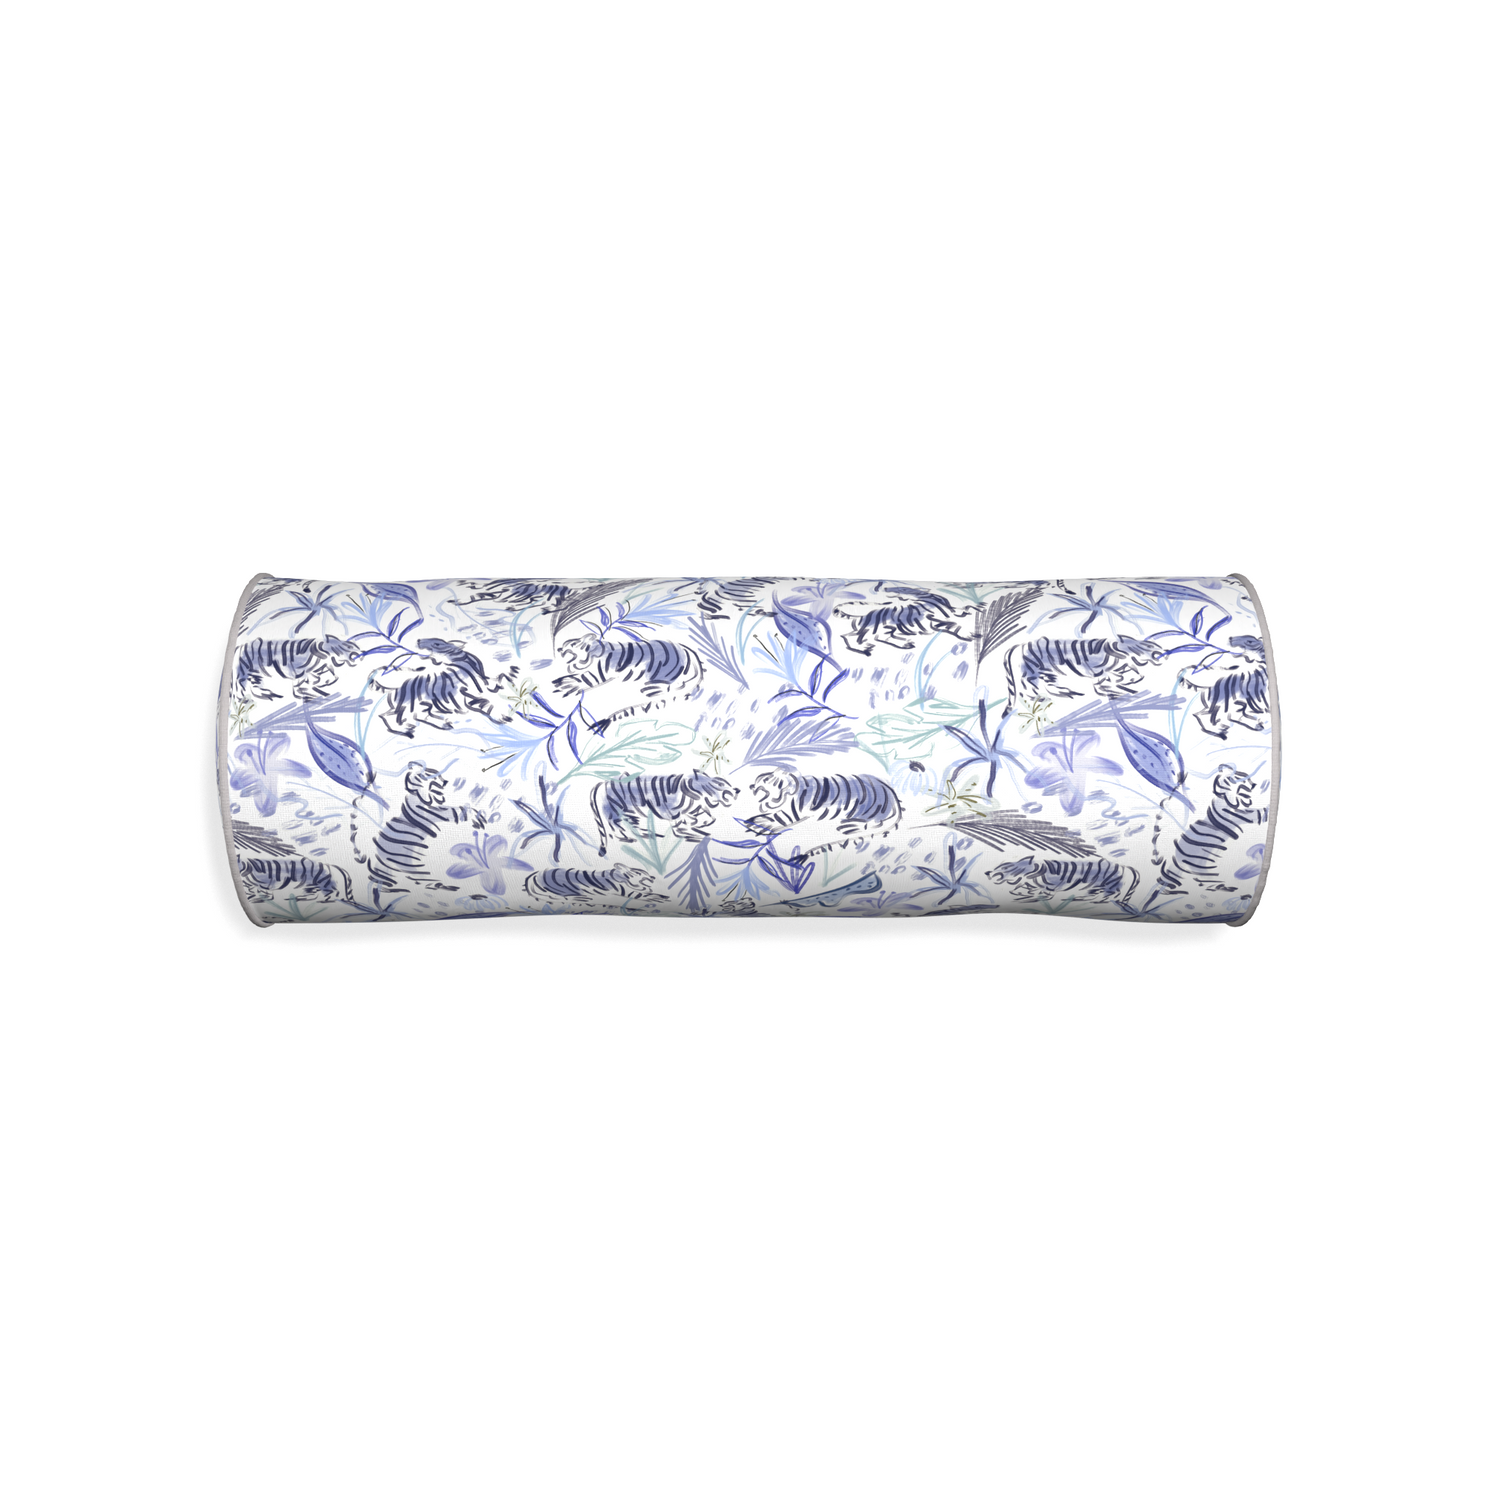 Bolster frida blue custom blue with intricate tiger designpillow with pebble piping on white background